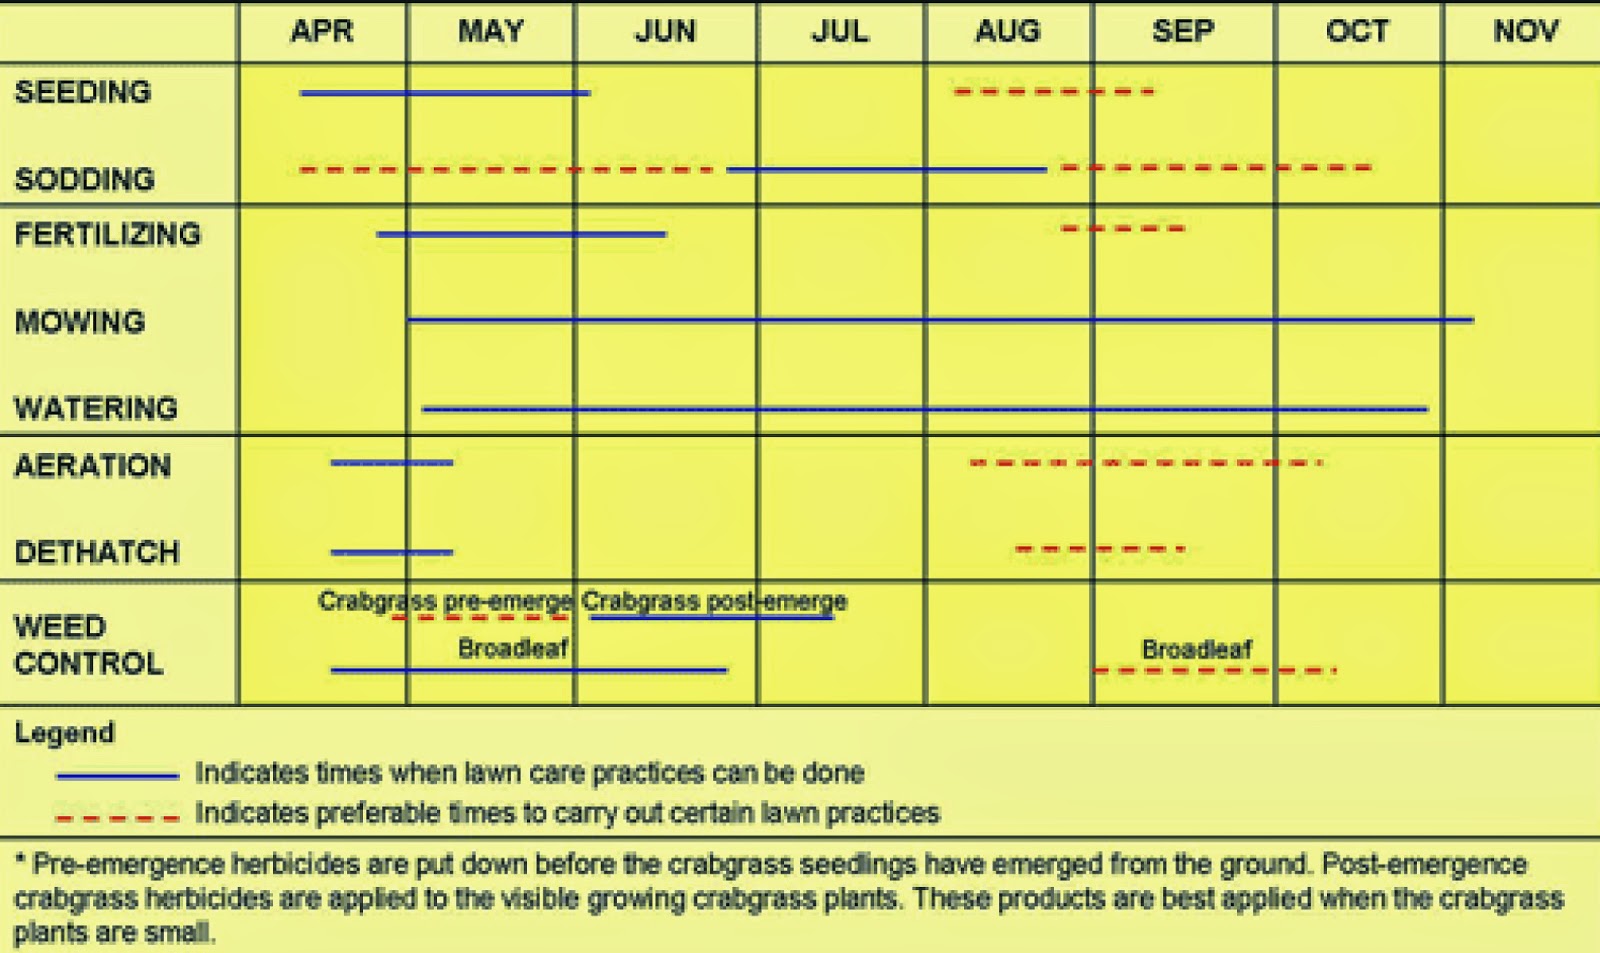 Yard Calendar Note that this calendar indicates the optimal and second-best timing for general lawn care. For more details about lawn care, be sure to visit our Extension ...